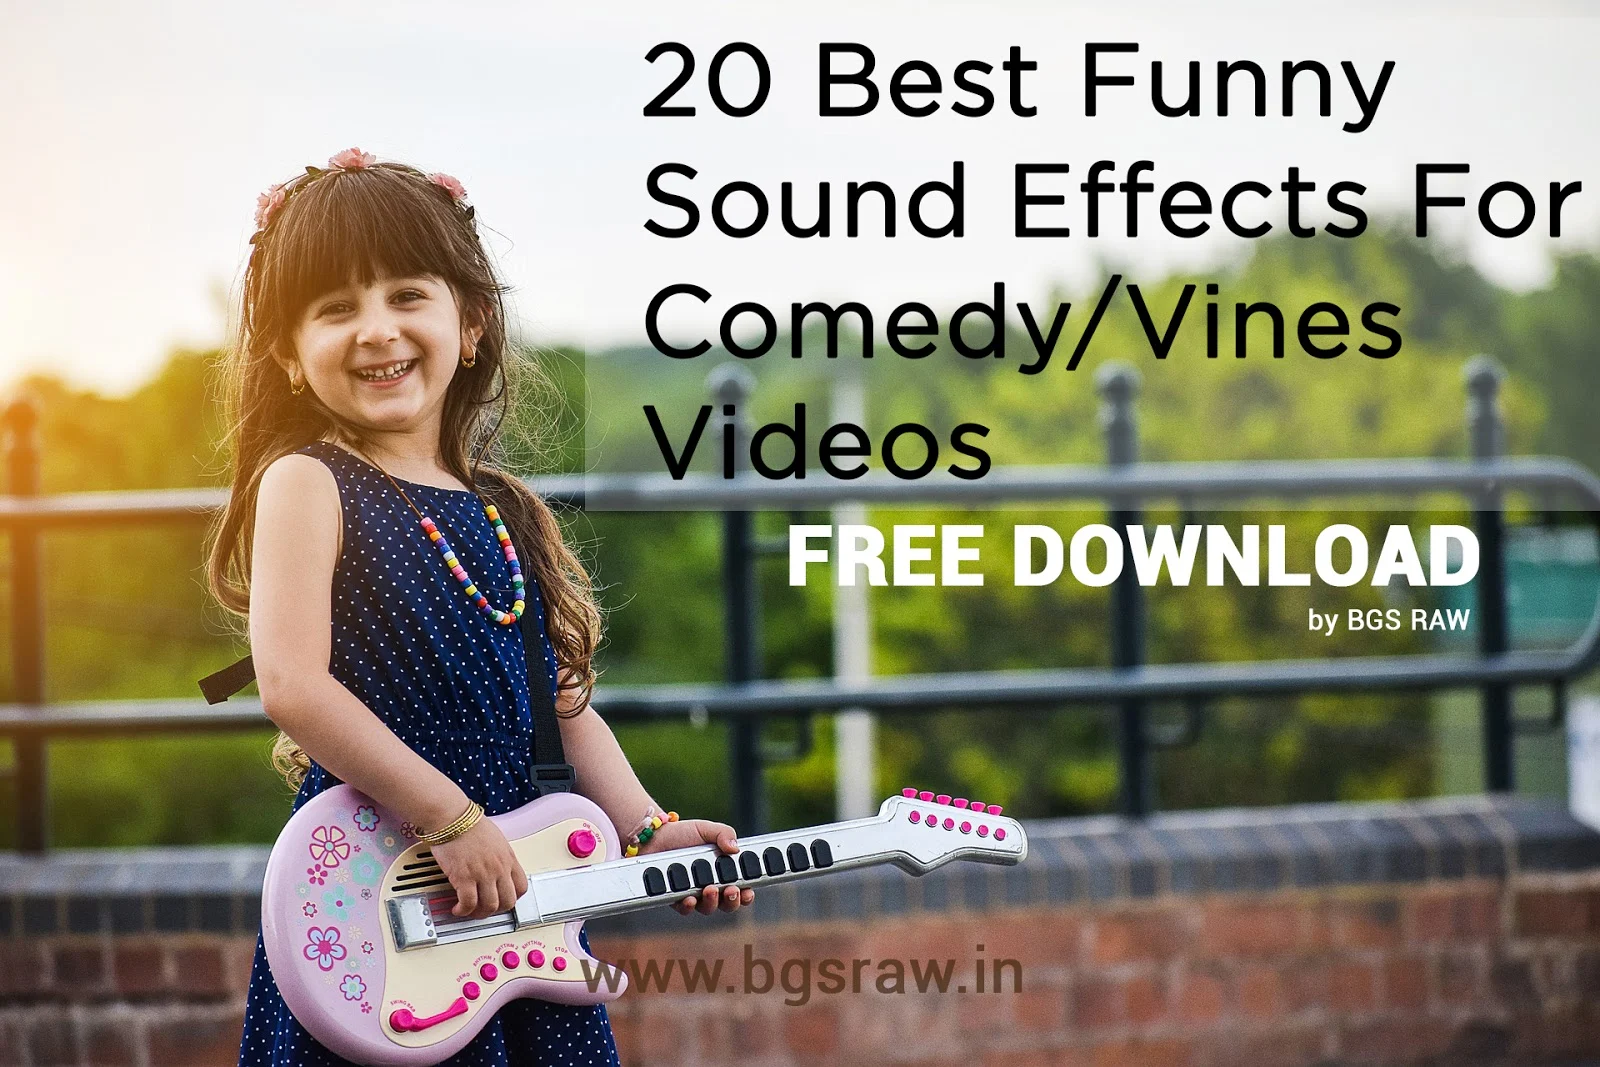 20 Best Funny Sound Effects For Comedy/Vines Videos - No Copyrights, free  sounds effects, bb ki vines sounds effects, amit badhana sounds effects, aashis chanclani comedy effects, FUNNY SOUND EFFECTS FOR VINES